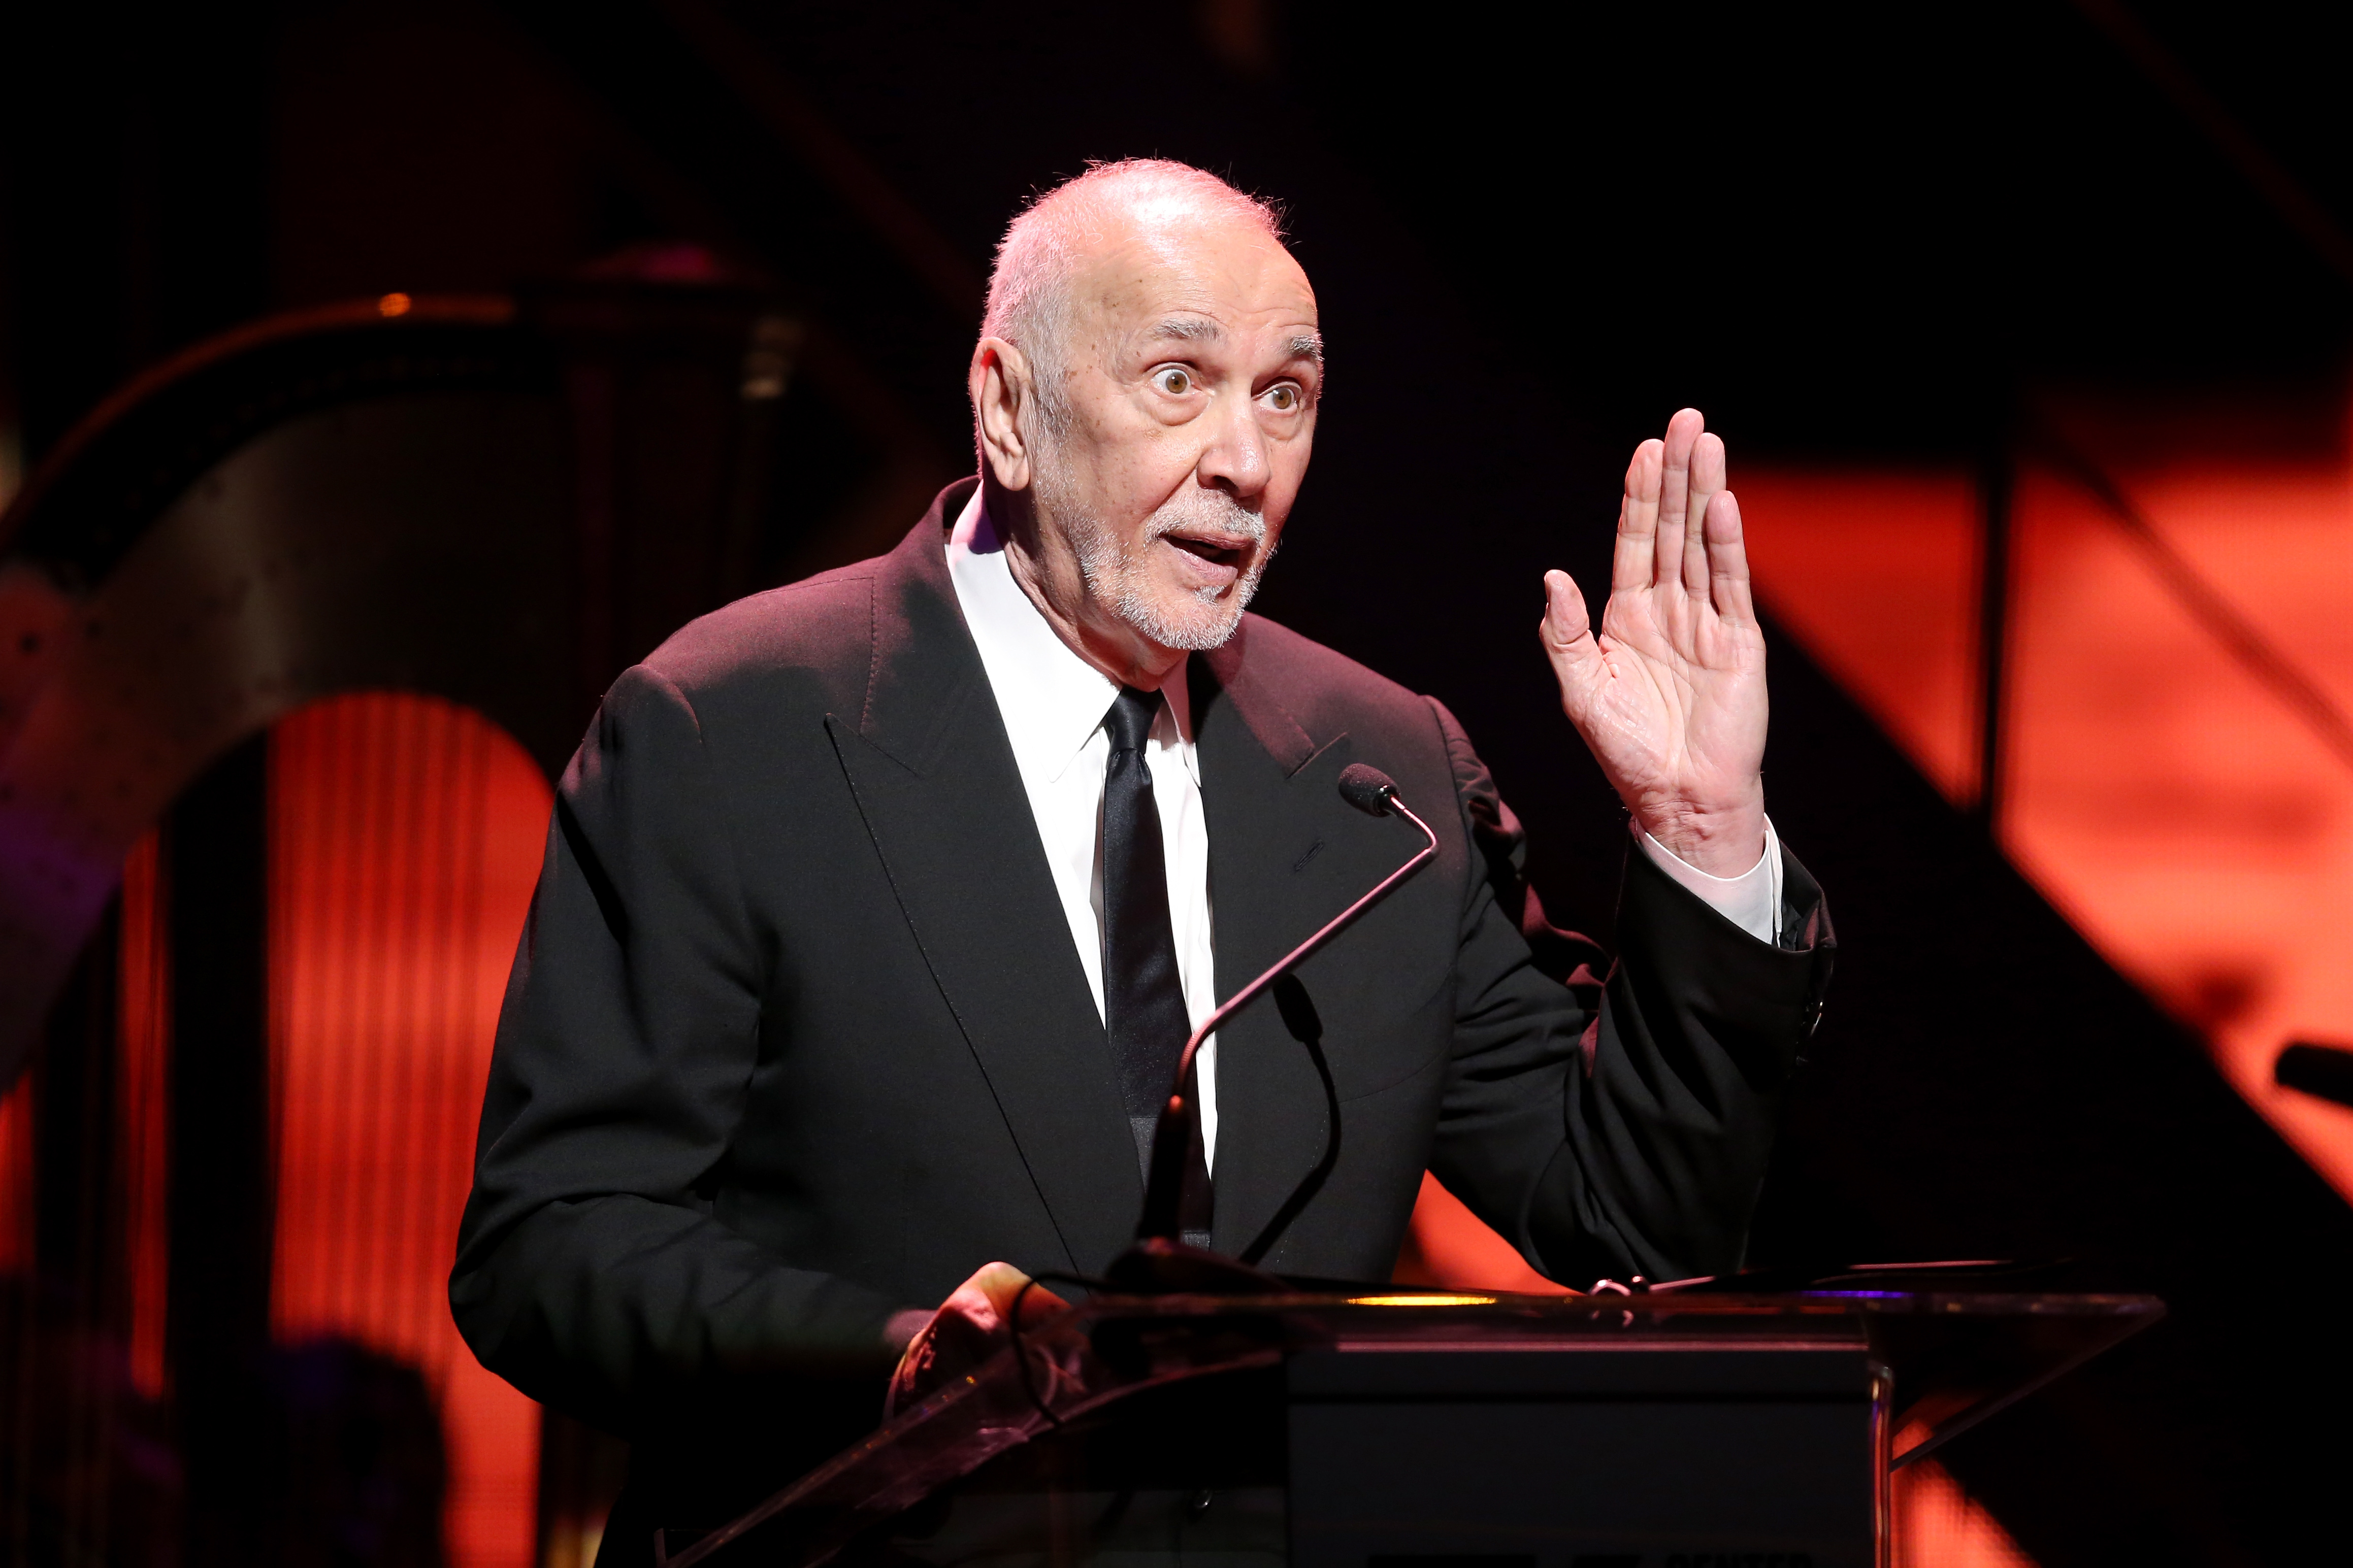 Frank Langella onstage at the Center Theatre Group 50th Anniversary Celebration at Ahmanson Theatre on May 20, 2017 in Los Angeles.